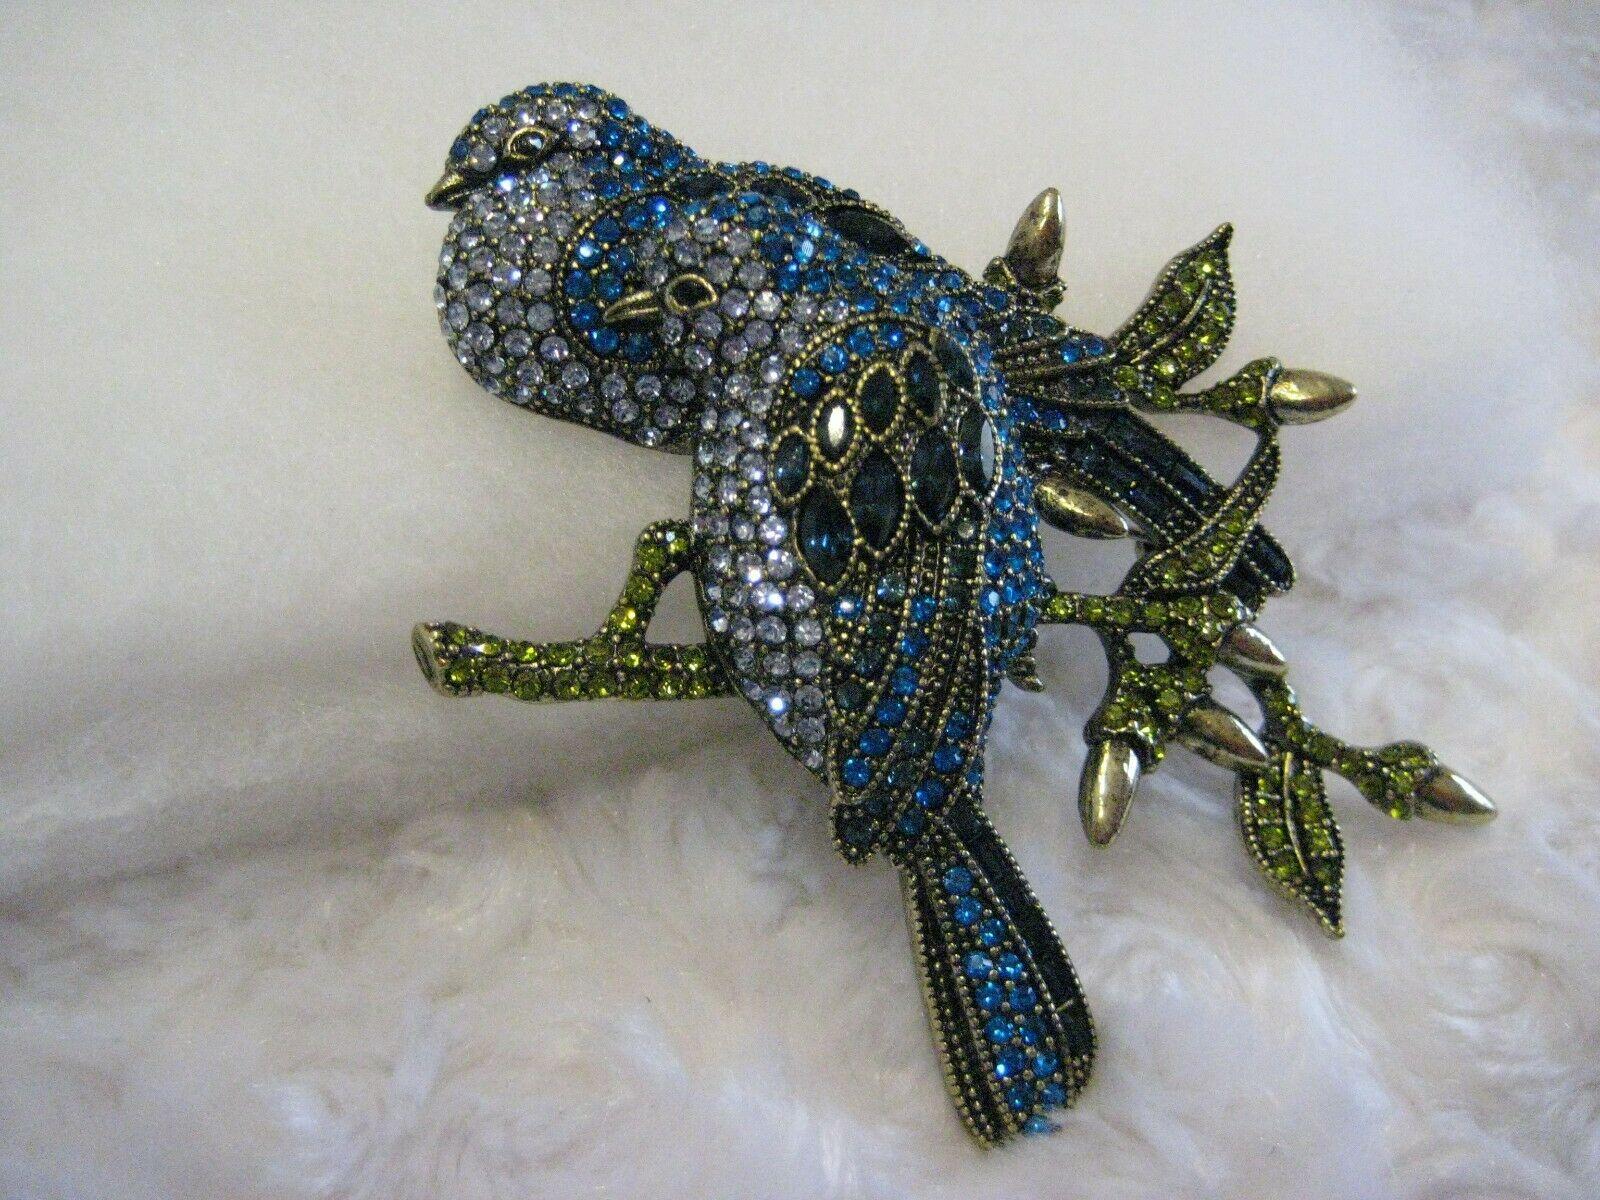 This darling pair of dazzling birds come fully decked in crystals.
Our Love Doves Crystal Pin is fitted with sapphire, Capri blue, and Montana crystal pavé, making these sweet birds the highlight of any ensemble they adorn.
Perched delicately on an